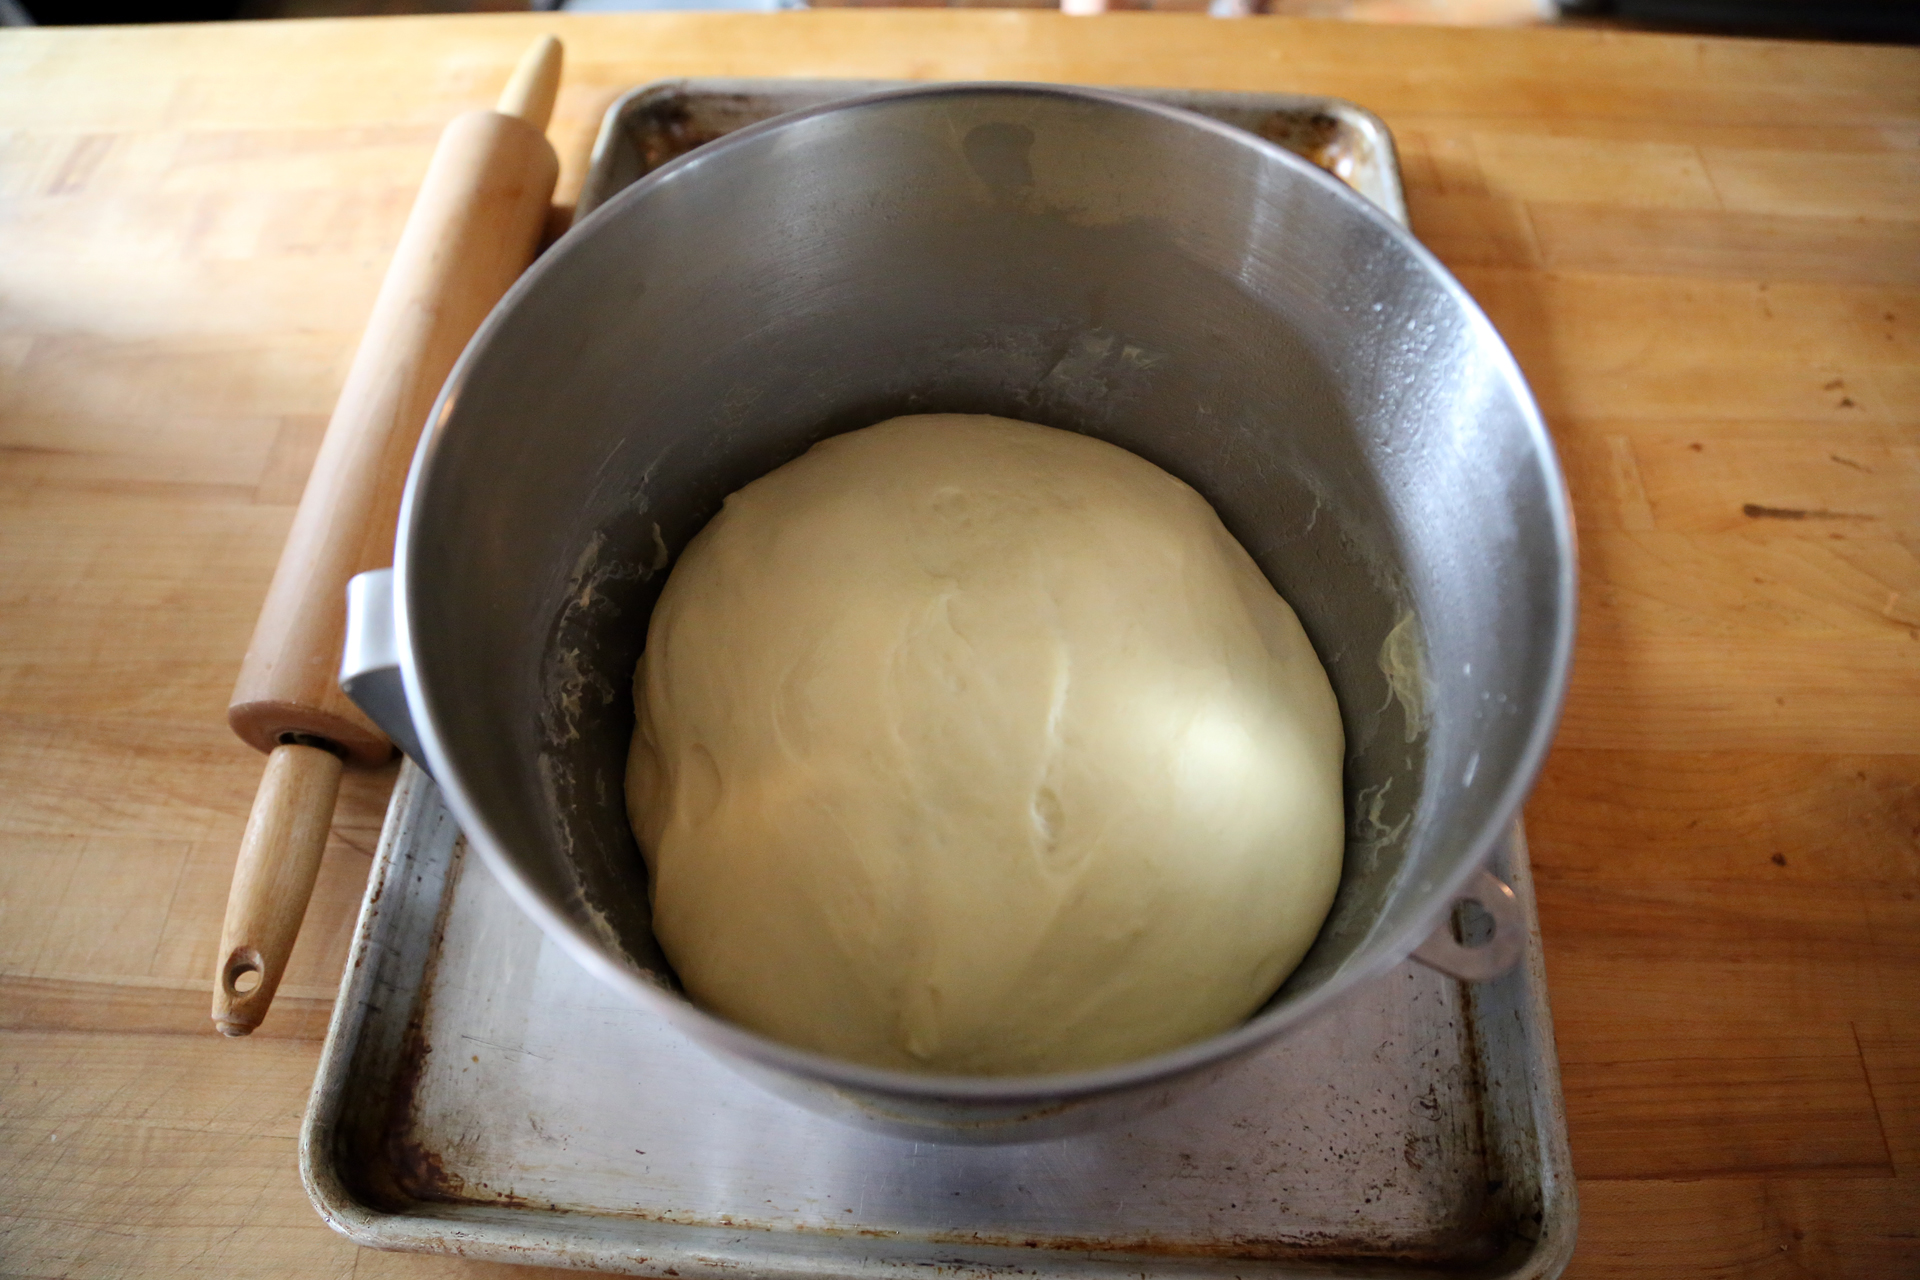 The raised dough is ready to roll out.